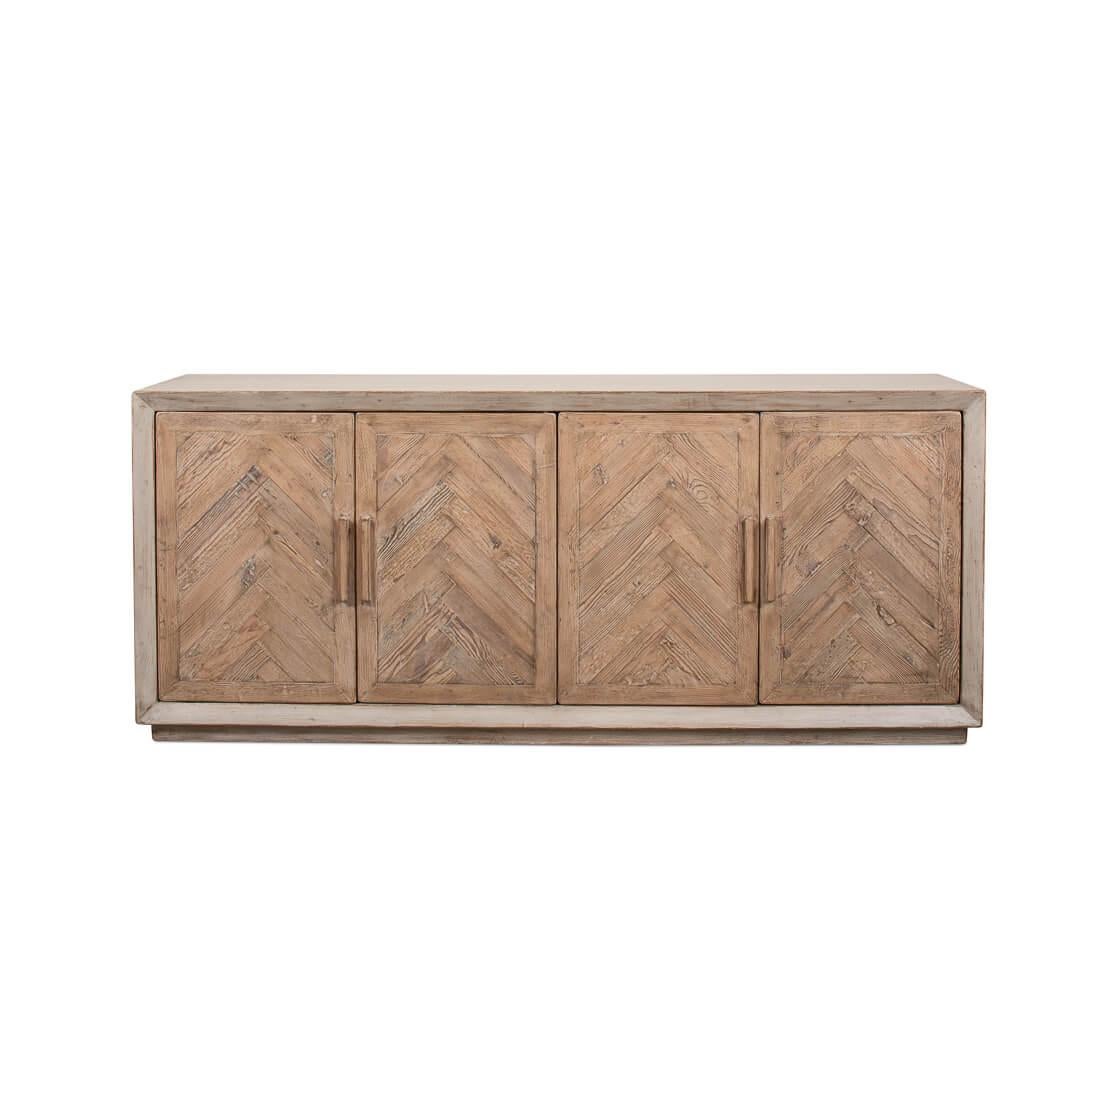 This cabinet showcases the natural allure of reclaimed pine, finished by hand in a nuanced Stone Grey that tells of whispered elegance and earthy charm. Its doors, graced with a chevron pattern, open to a world where your treasures are kept safe and